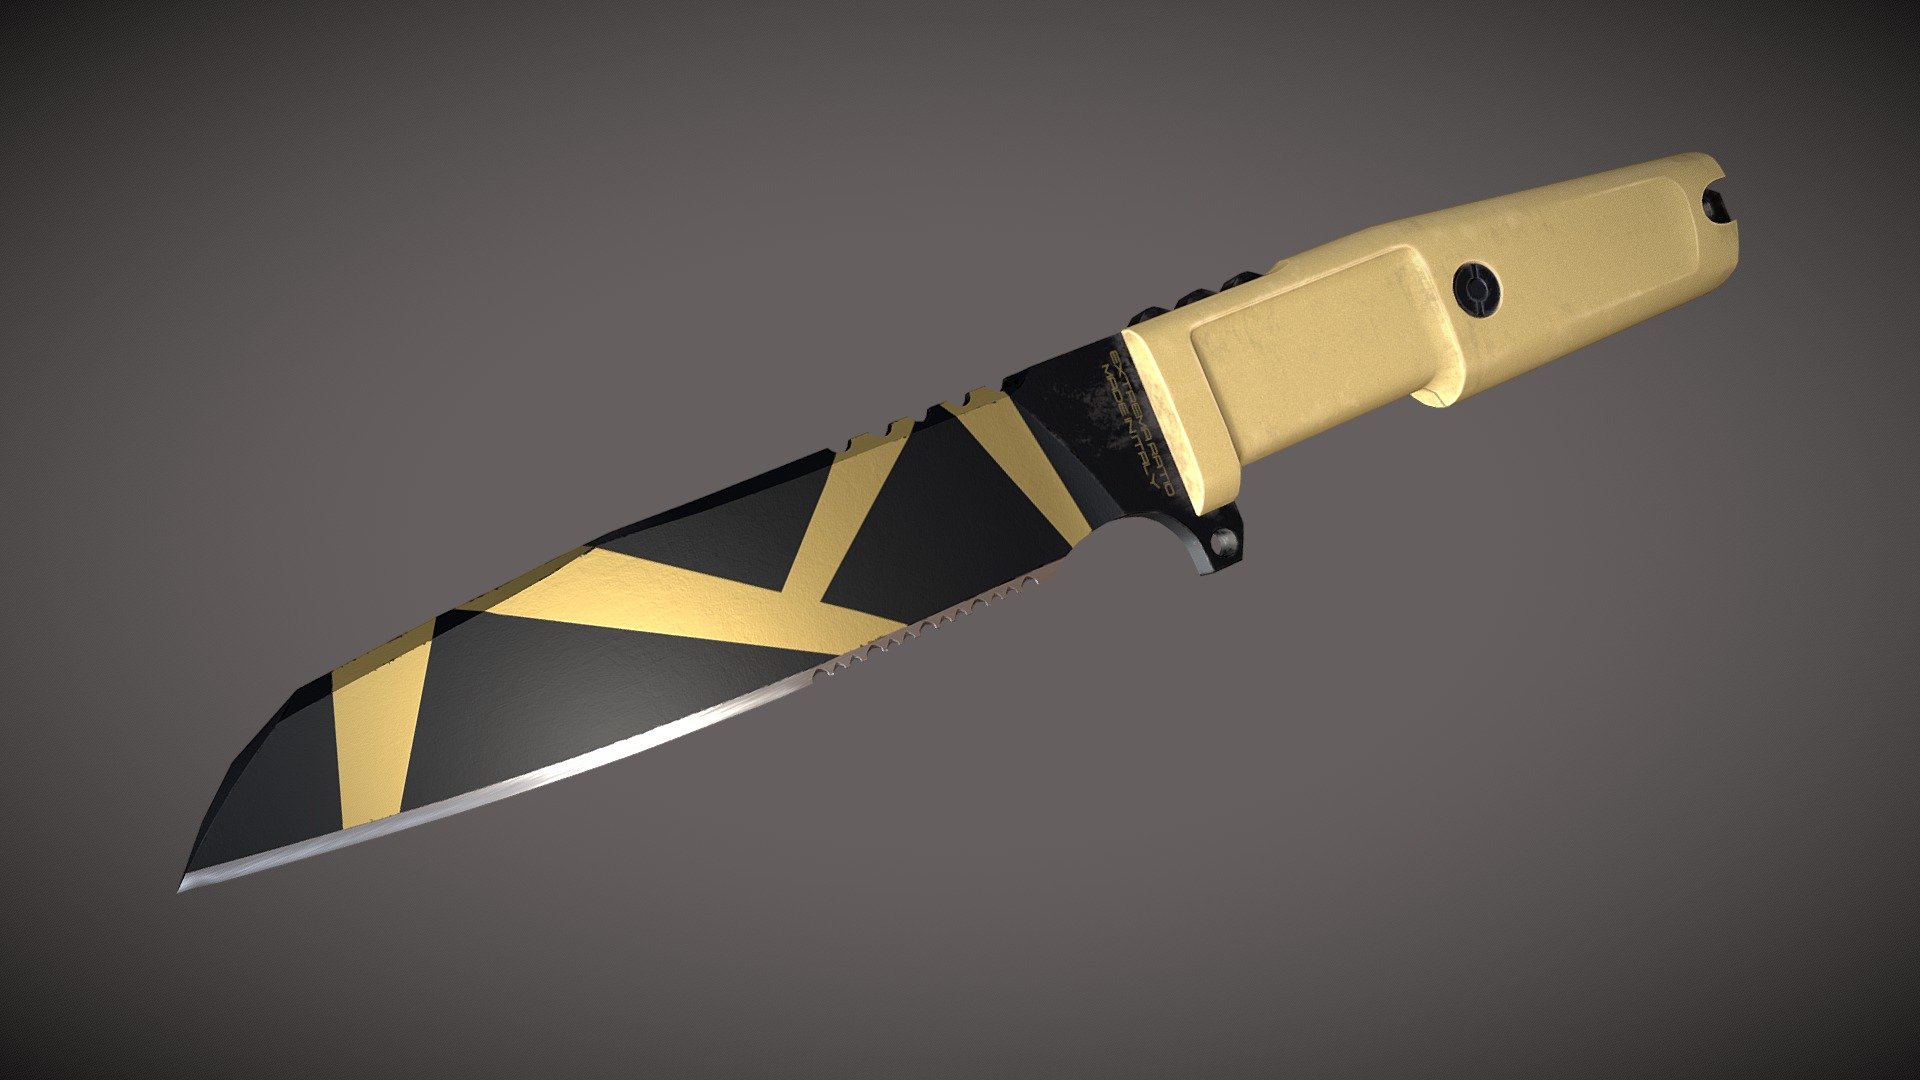 Italian tactical knife. Suitable as a game asset.

Extra file include:
- high poly model (fbx);
- low poly model (fbx);
- original blend file;
- 2k textures (png - 16bit) 3d model